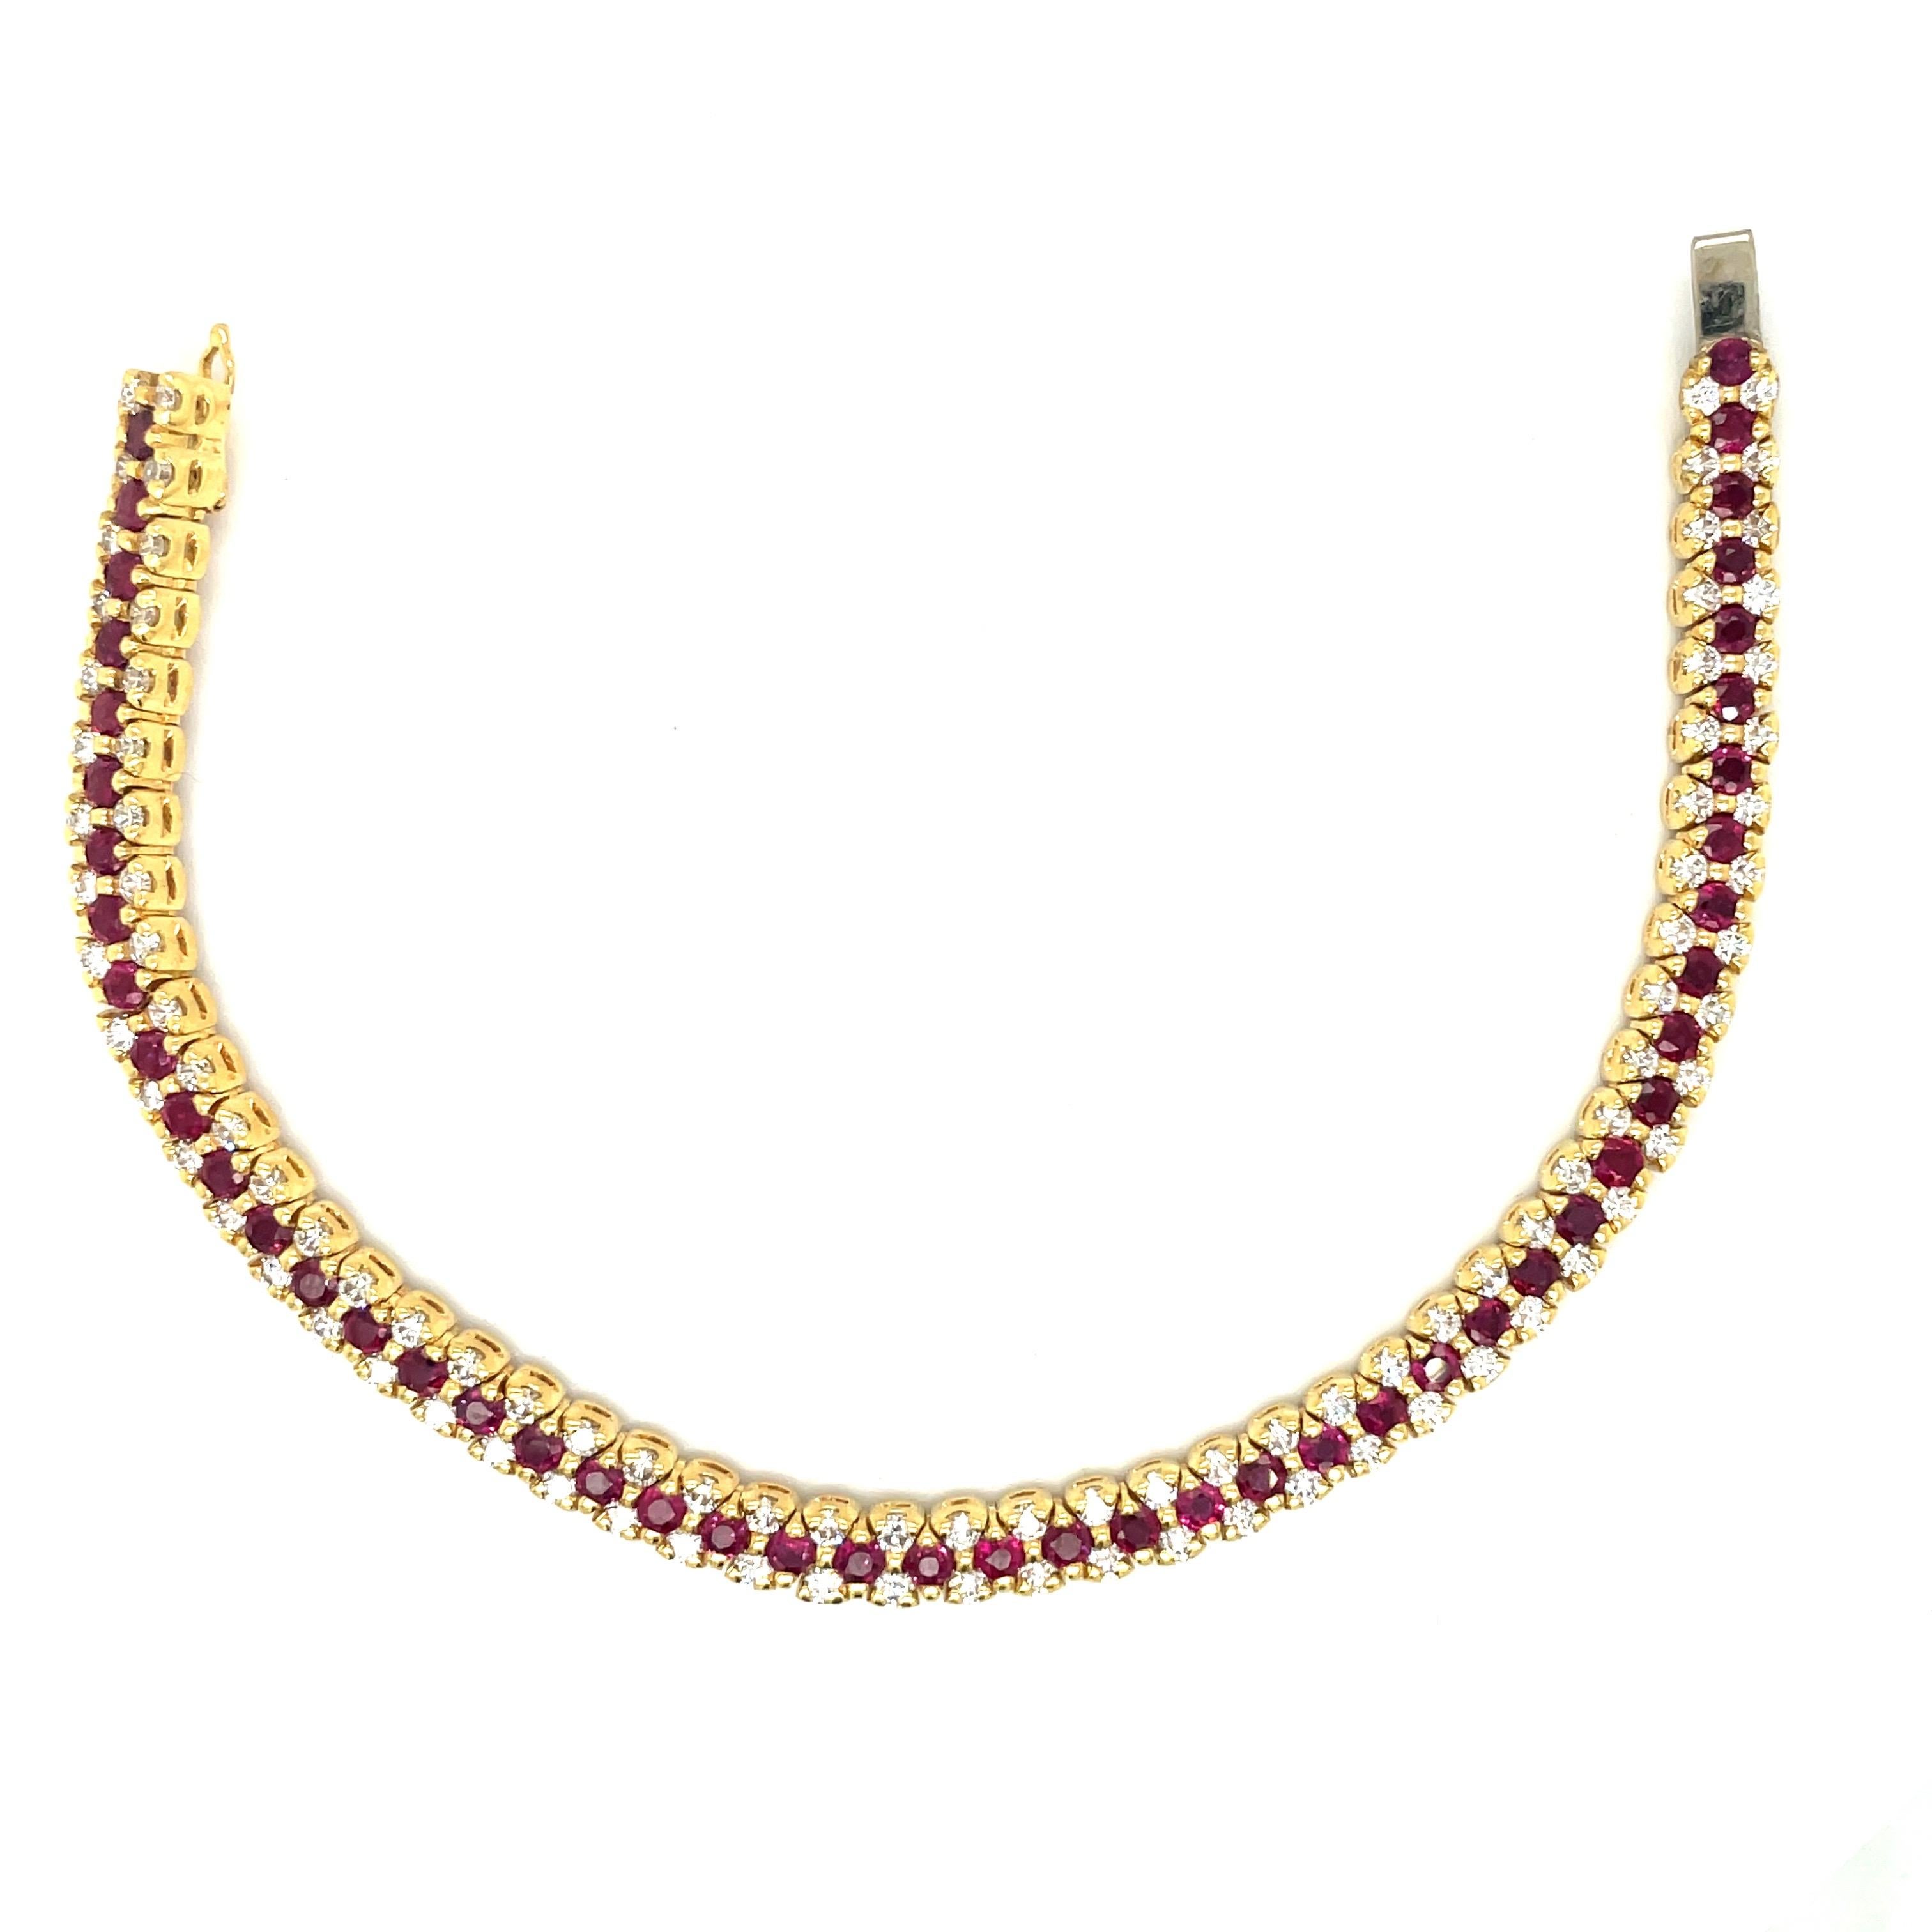 Round Cut 18KT Yellow Gold Diamond 3.24Ct. & Ruby 5.18Ct. Tennis Bracelet For Sale